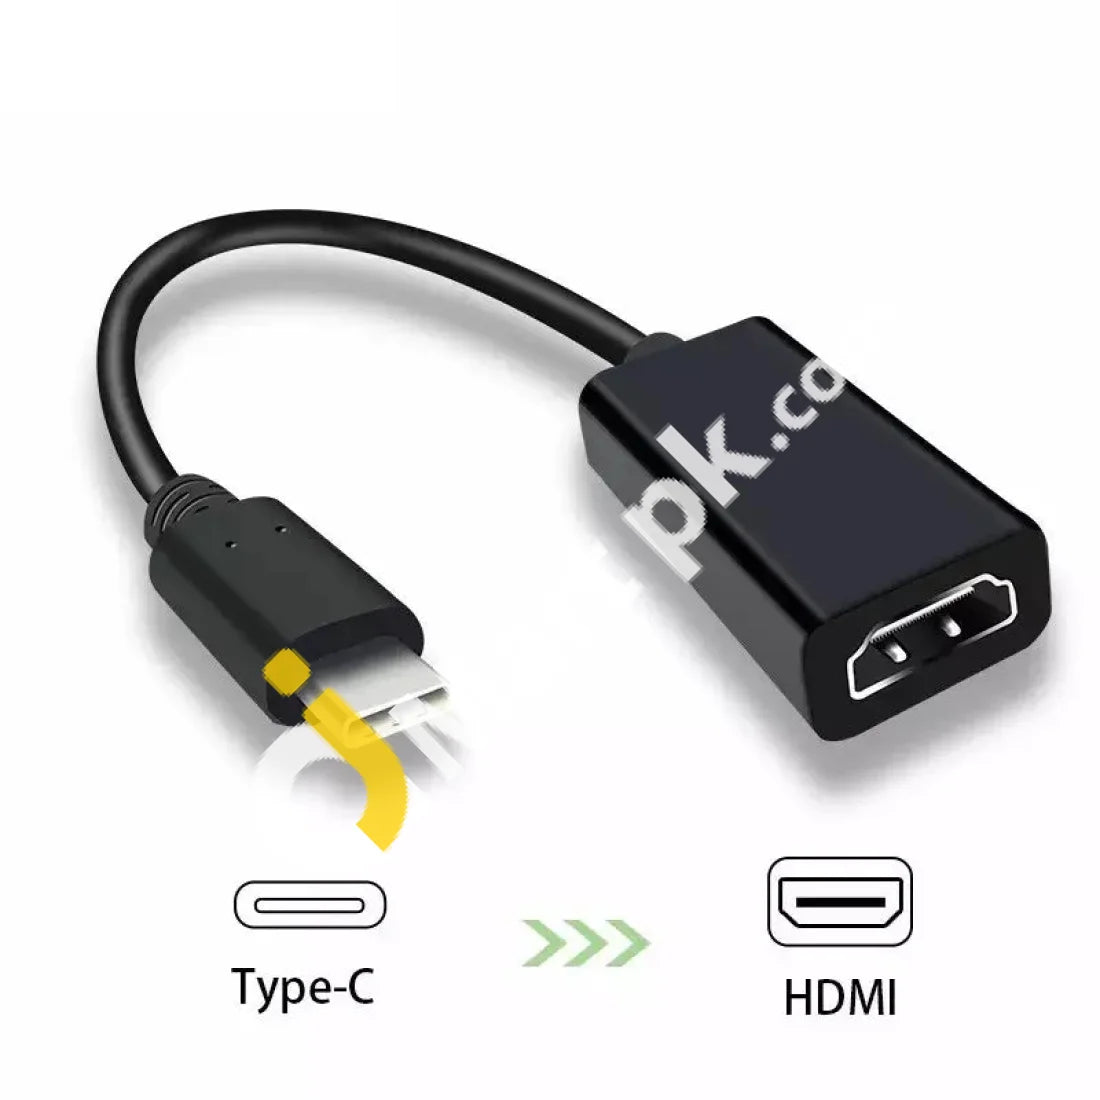 Tgm Usb-C To Display Port Adapter Super High Speed Usb Revision 3.1 - Imported From Uk